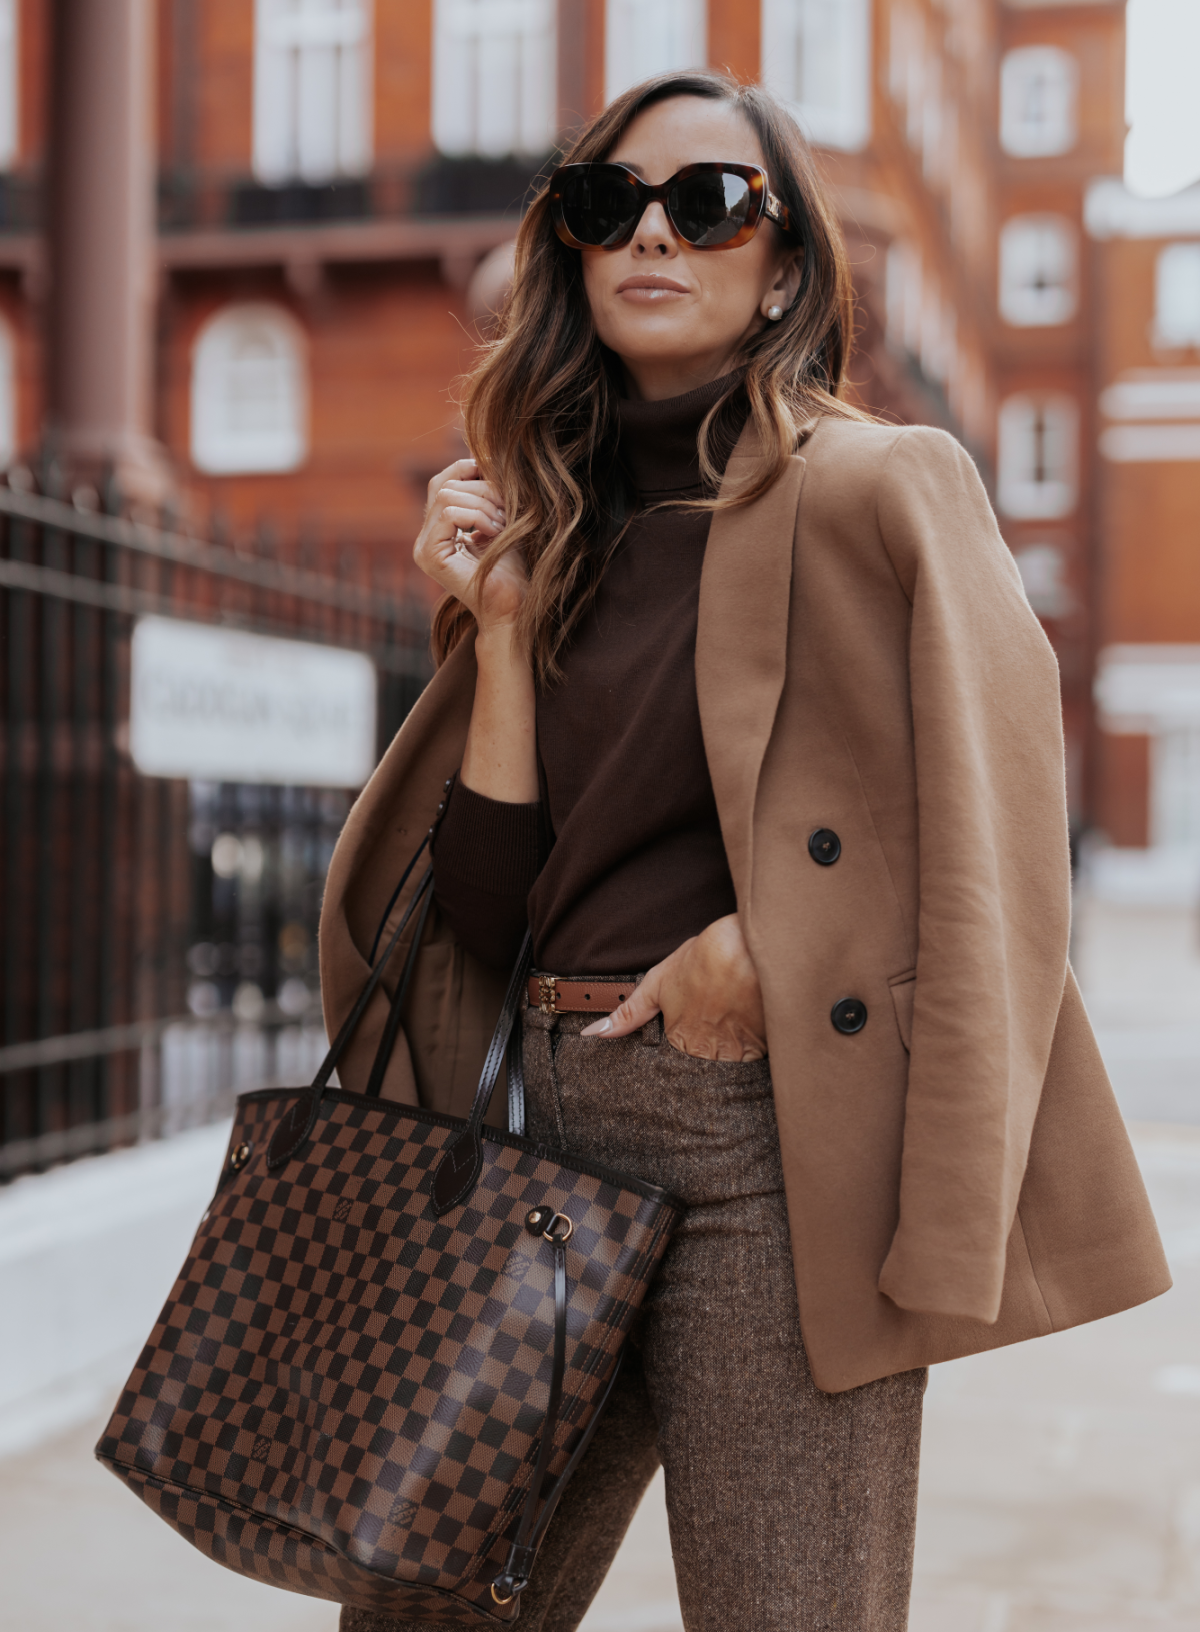 https://alysonhaley.com/wp-content/uploads/2023/10/brunette-woman-in-knightsbridge-london-high-waisted-textured-trousers-talbots-brown-turtleneck-sweater-talbots-camel-blazer-brown-gianvito-rossi-booties-autumn-outfit-inspiration-FEATURE-1.png